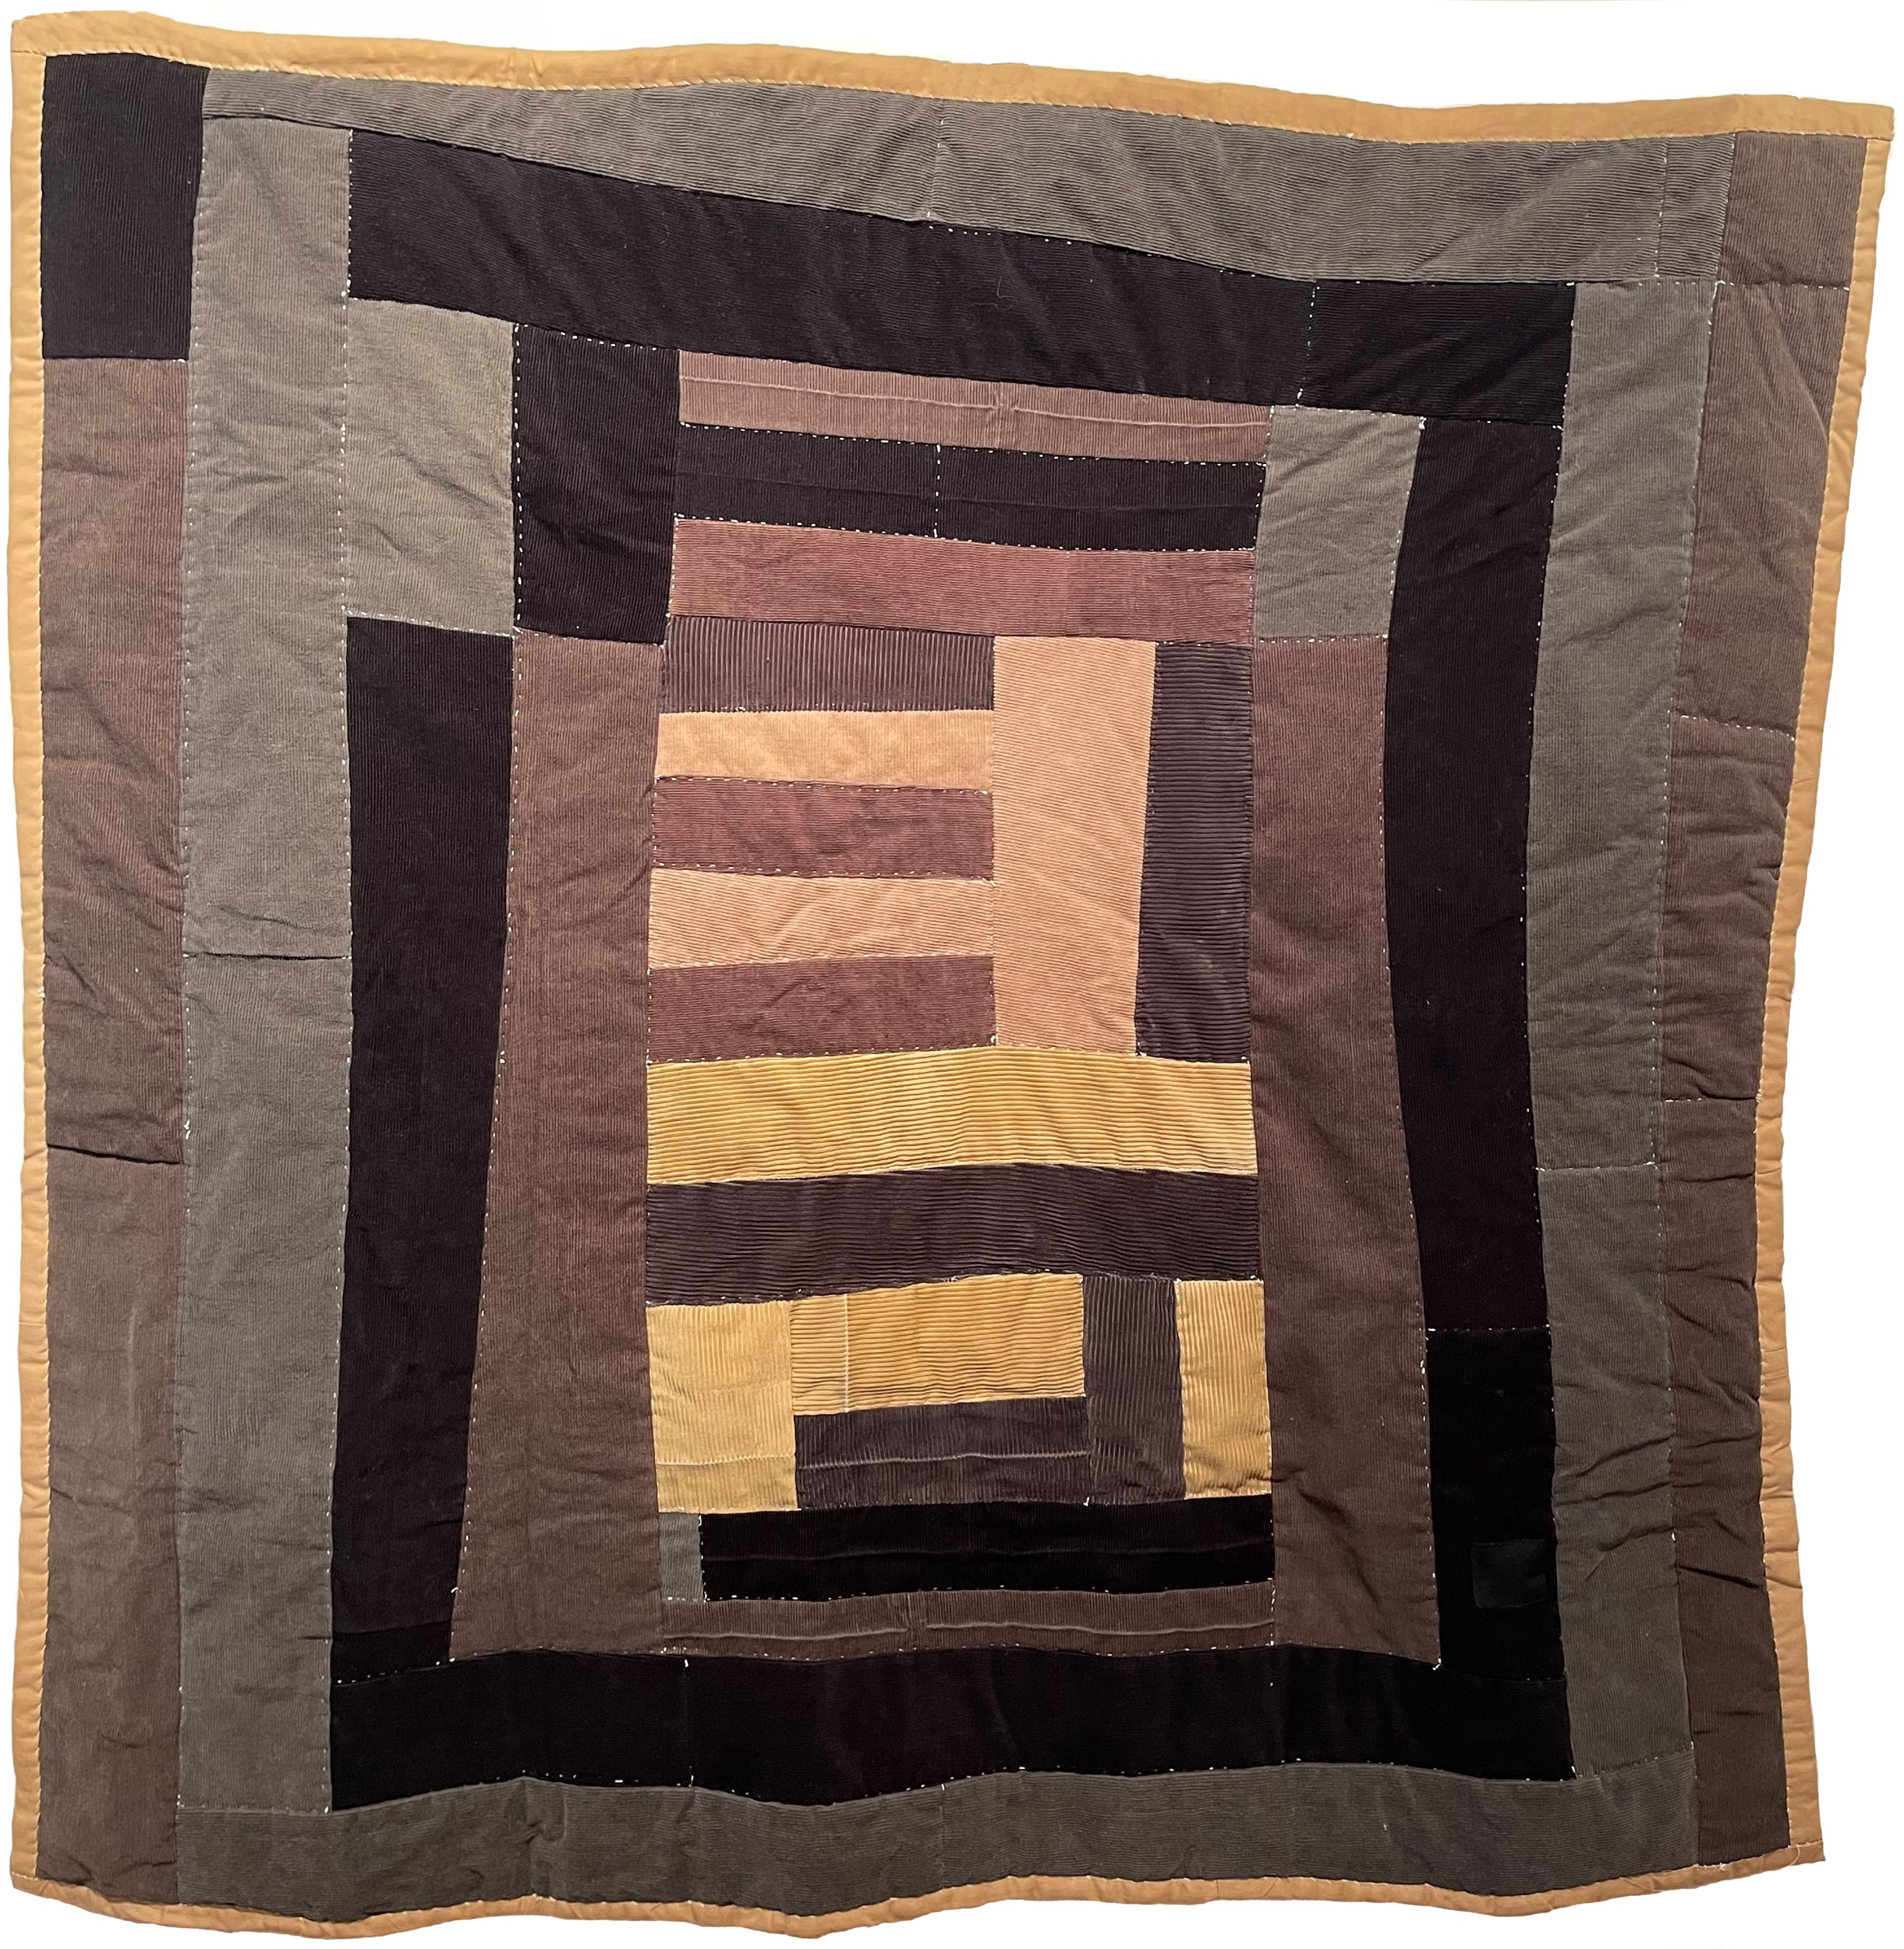   Joeann Pettway West    Improvisational quilt, 2023   48” x 47”  Corduroy fabrics  Hand-pieced, hand-quilted    LEARN MORE ABOUT THIS QUILT   